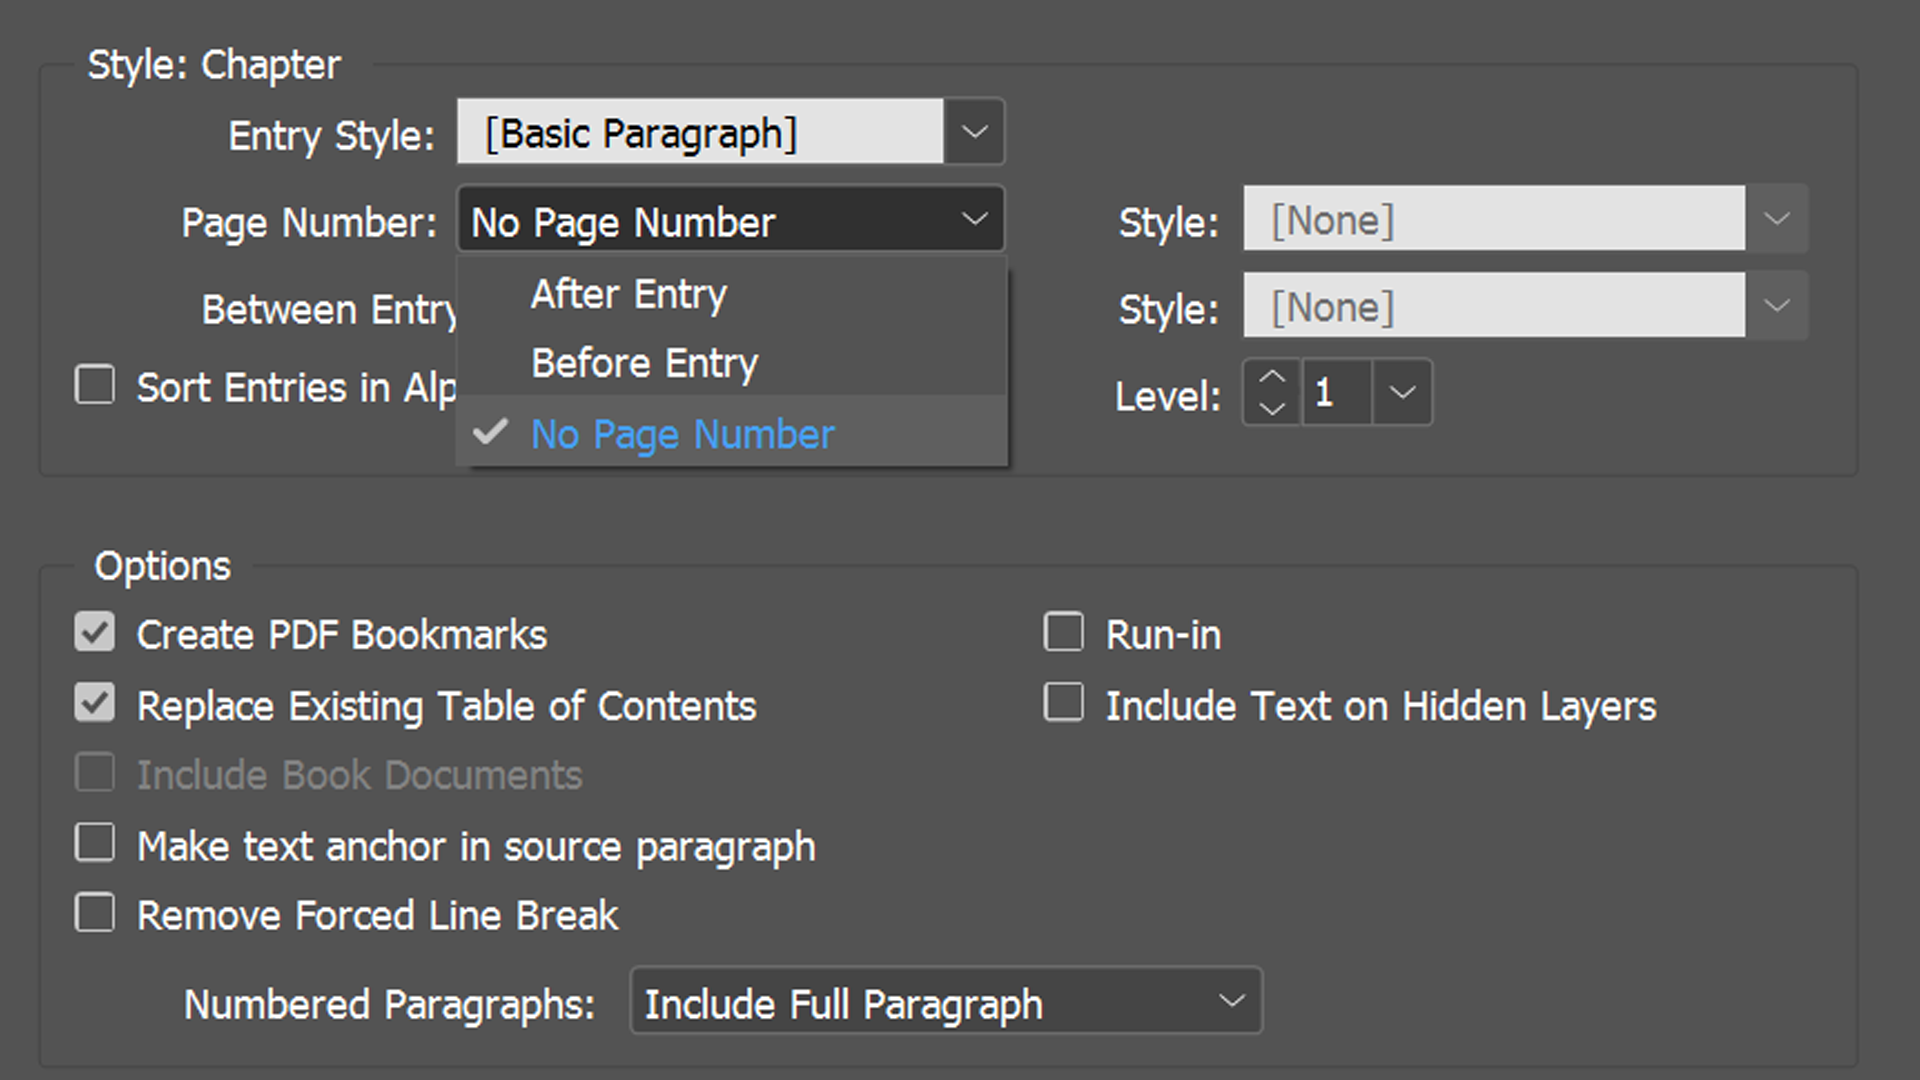 InDesign contents page setting page number to none - Come creare un sommario in InDesign